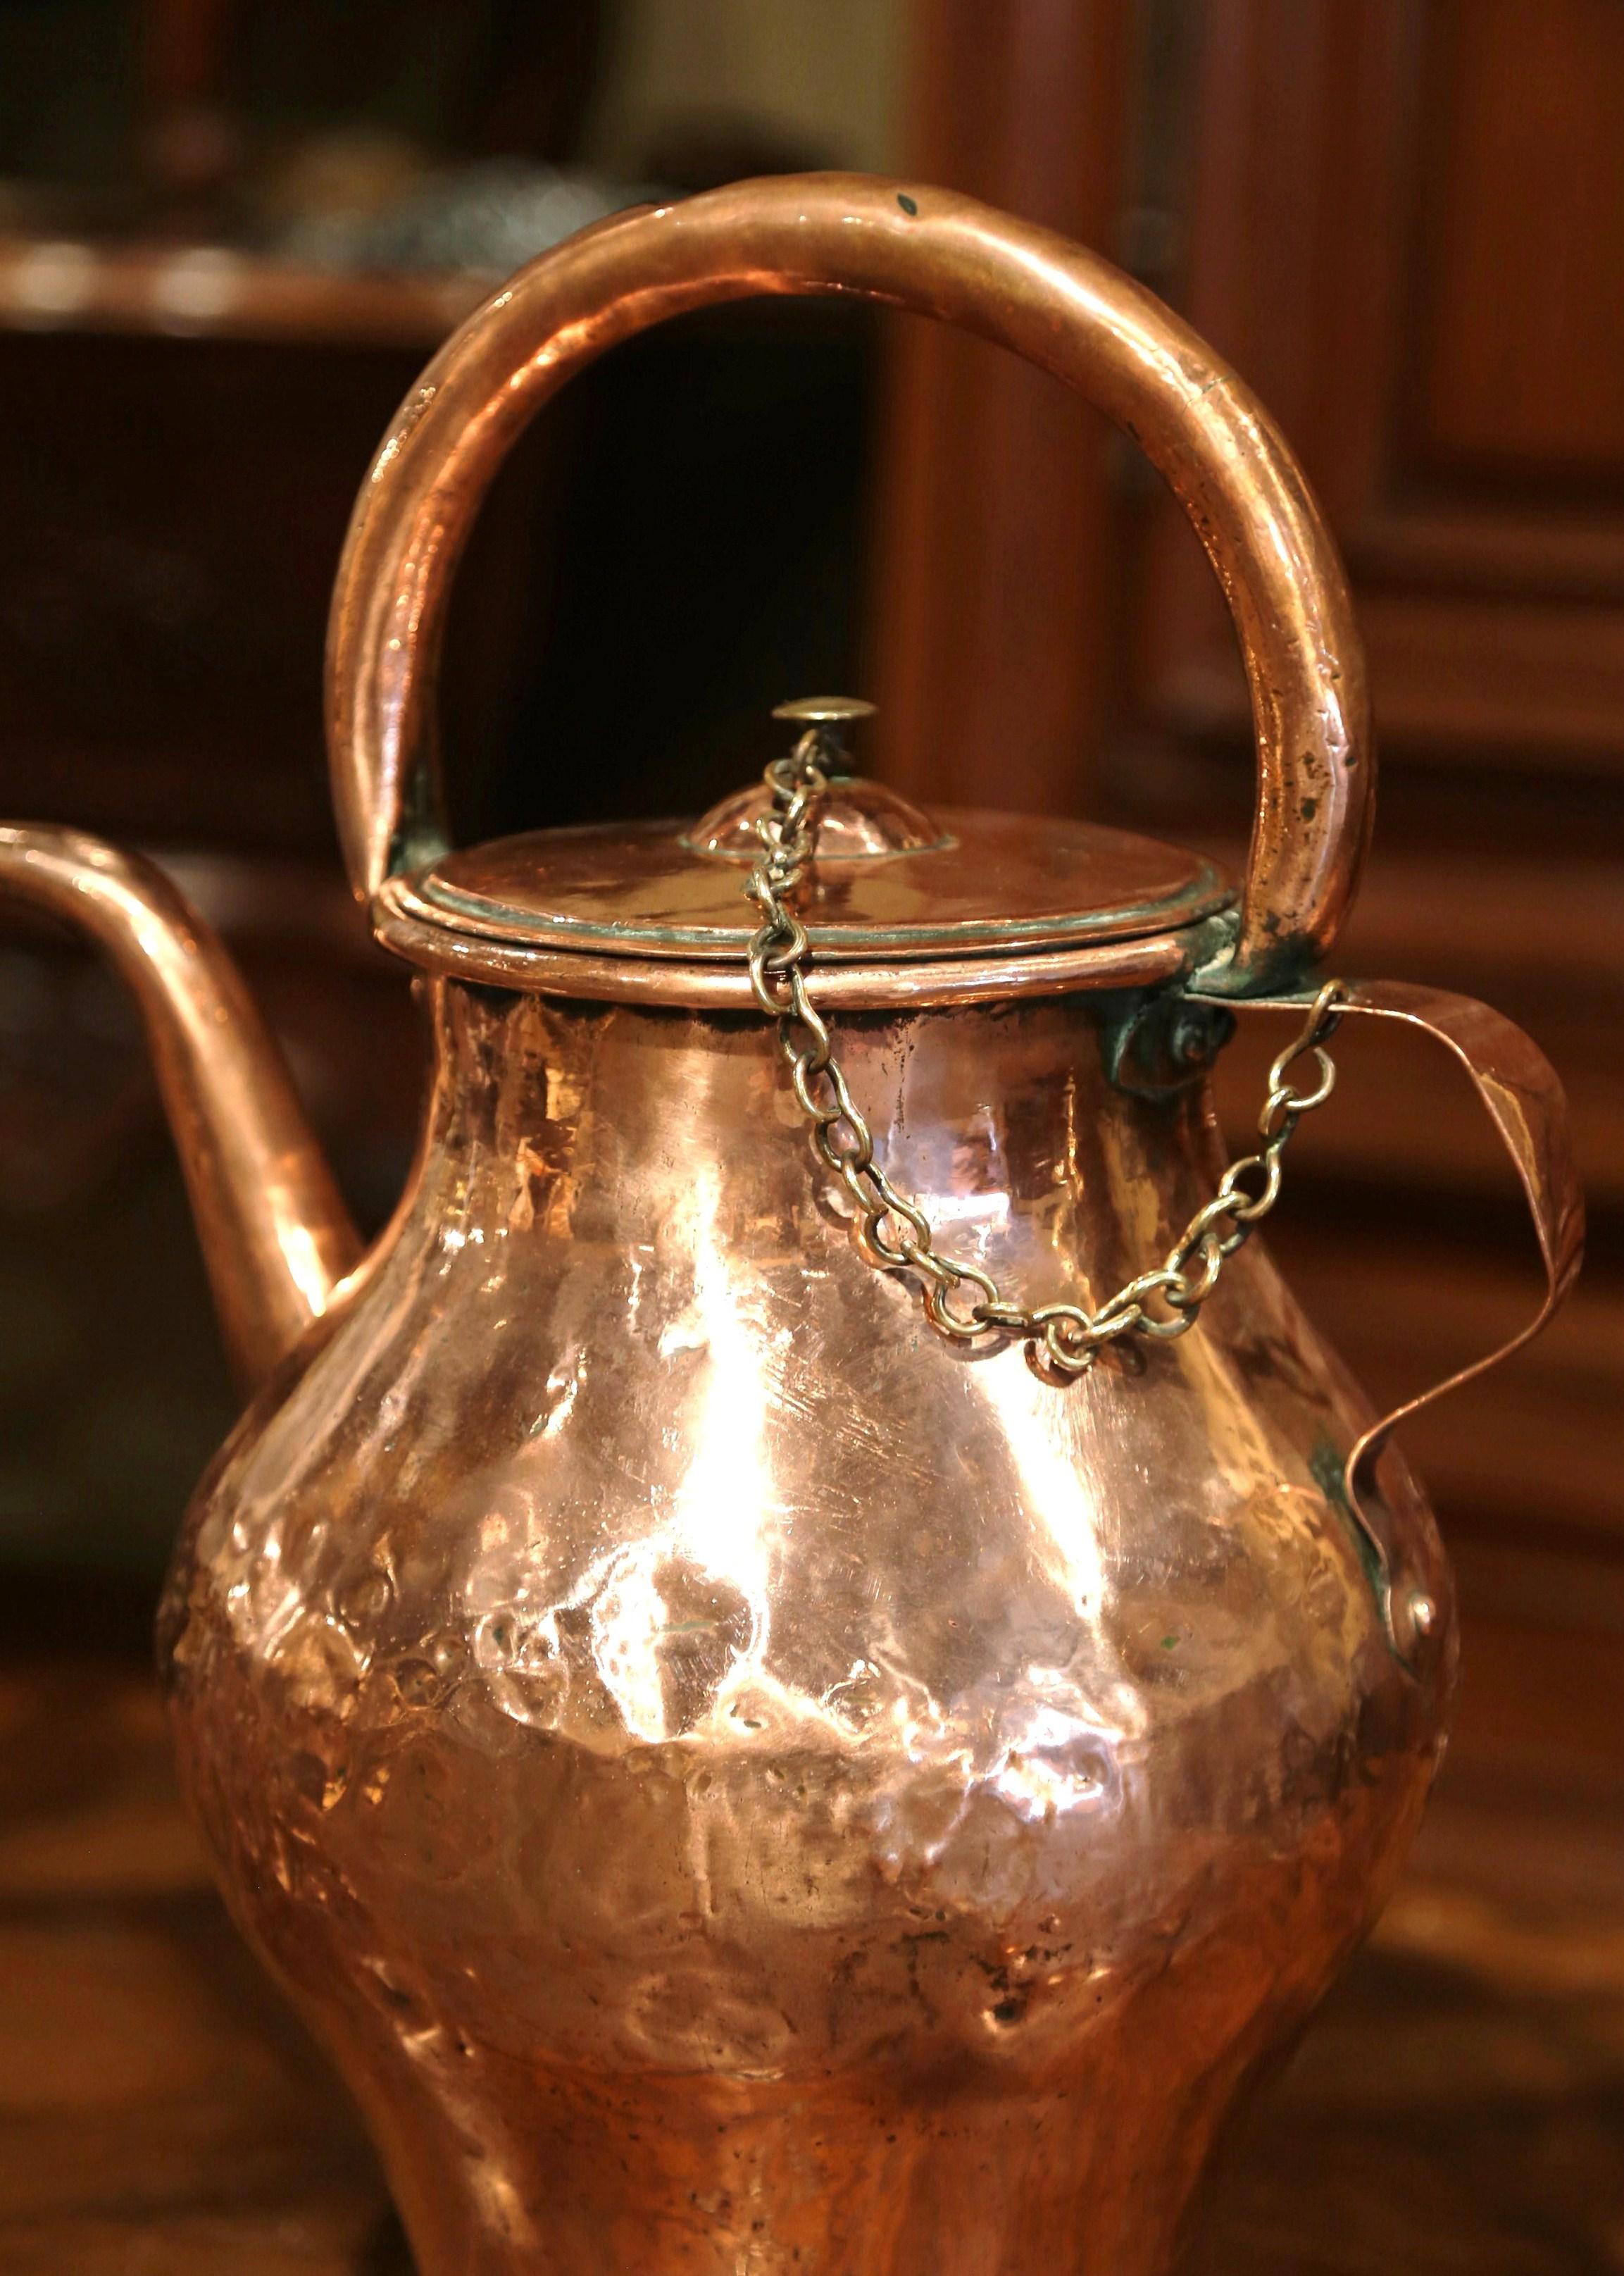 Decorate a kitchen cabinet with this elegant antique country pitcher. Crafted in Normandy, France circa 1780, and made of copper, the large hot water pitcher features a double handle and a lid tied with a chain. The rustic recipient is in excellent